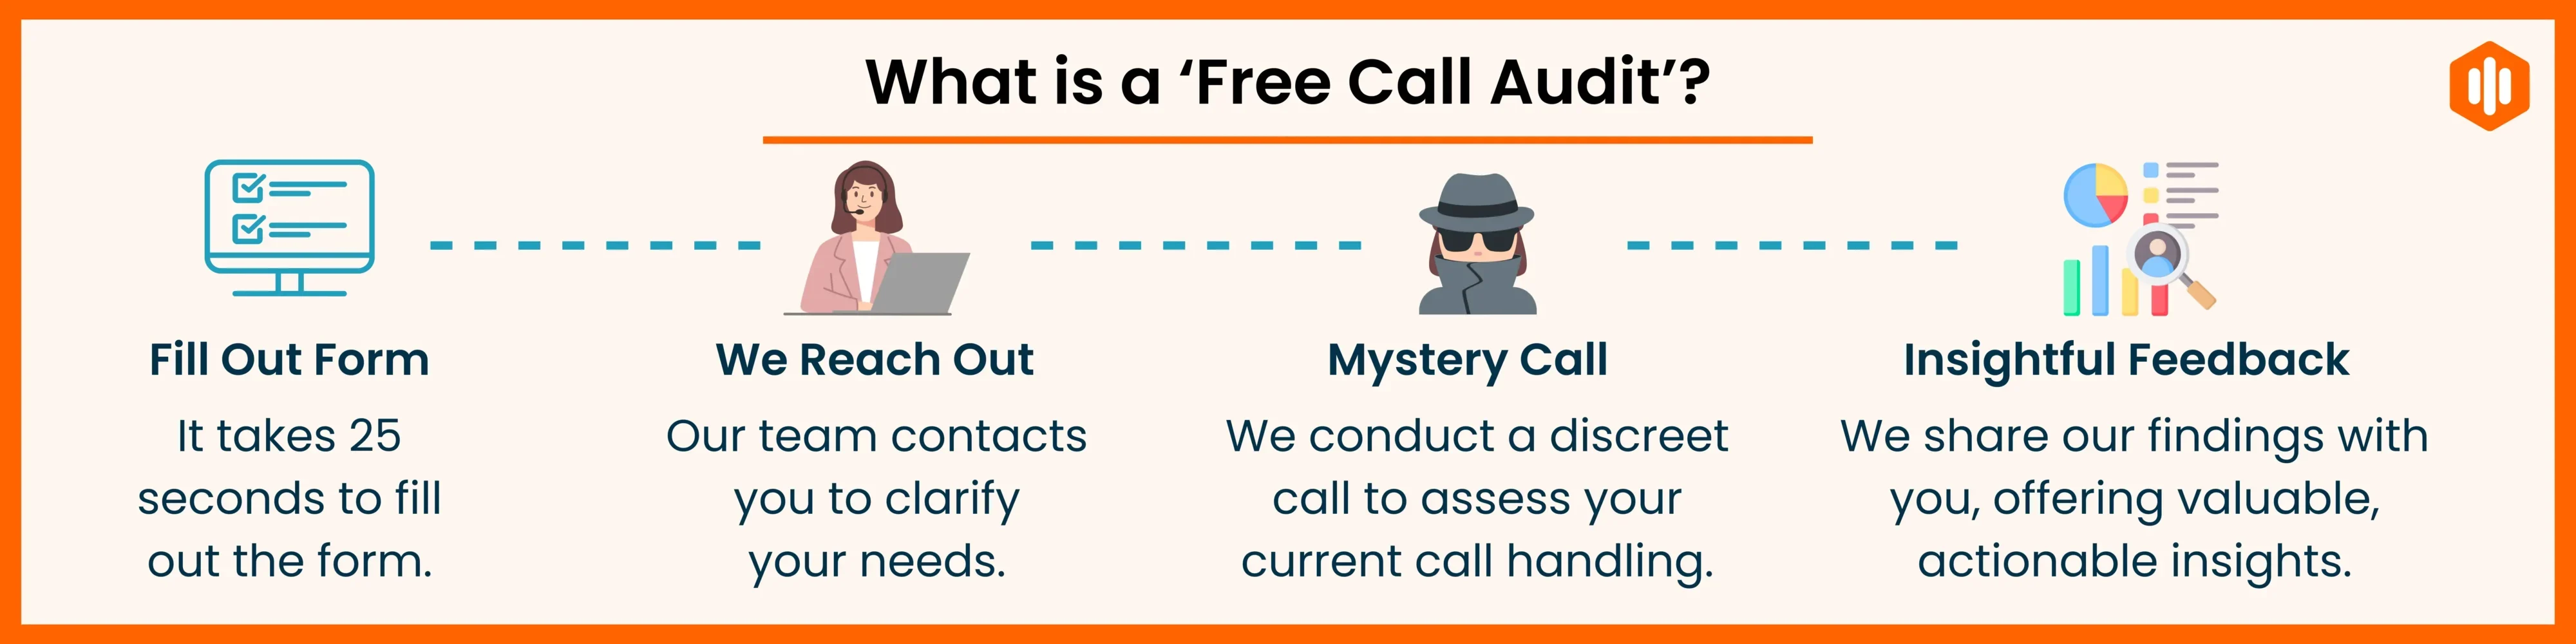 What is a Free Call Audit? - Graphic